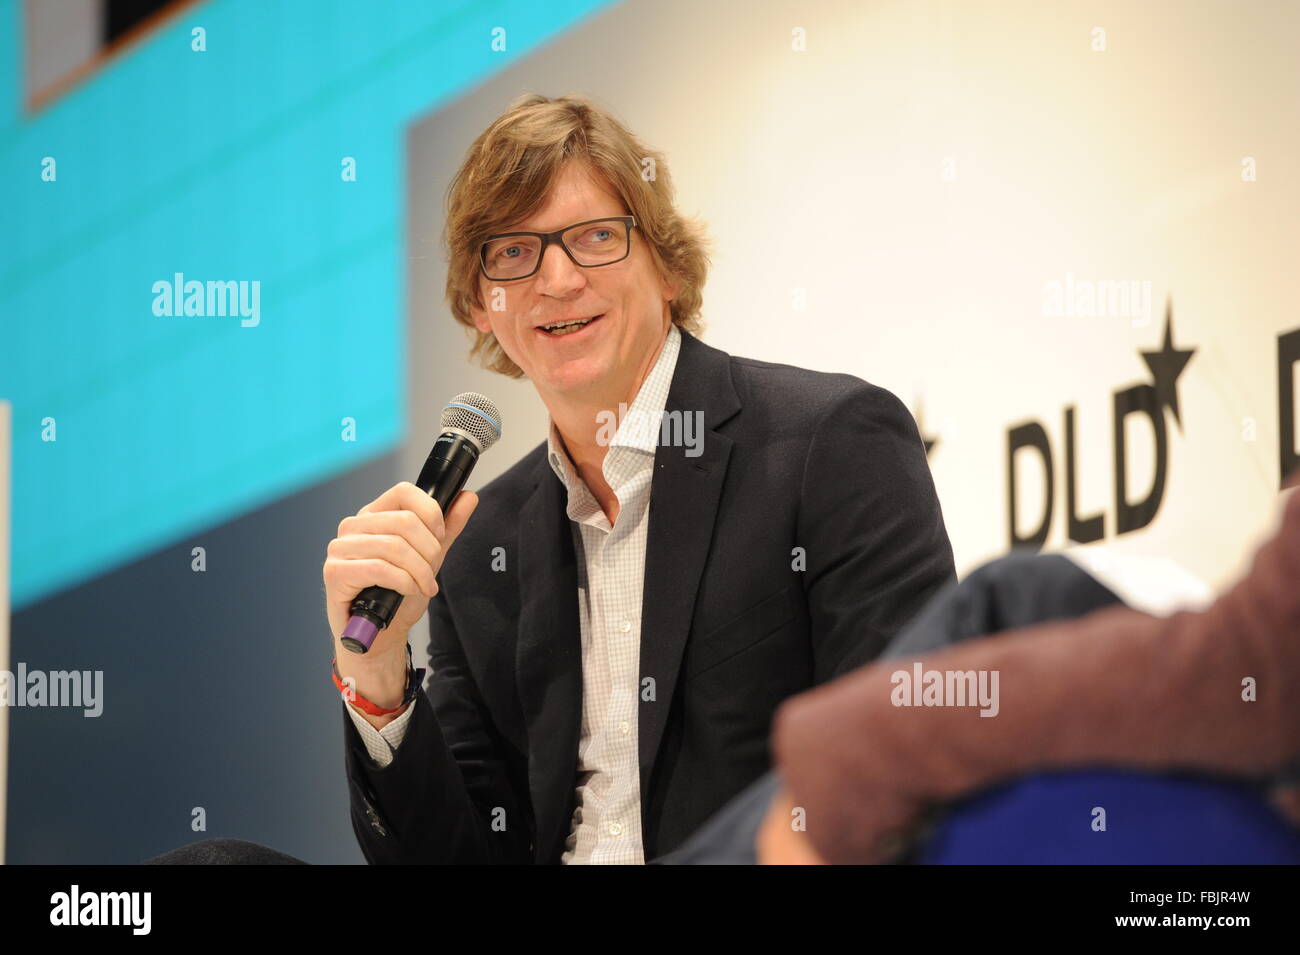 MUNICH/GERMANY - JANUARY 17: Niklas Zennström (Atomico) smiles on a panel discussion during the DLD16 (Digital-Life-Design) Conference at the HVB Forum on January 17, 2016 in Munich, Germany. DLD is a global network of innovation, digitization, science and culture, which connects business, creative and social leaders, opinion formers and influencers for crossover conversation and inspiration.(Photo: picture alliance / Jan Haas) Stock Photo